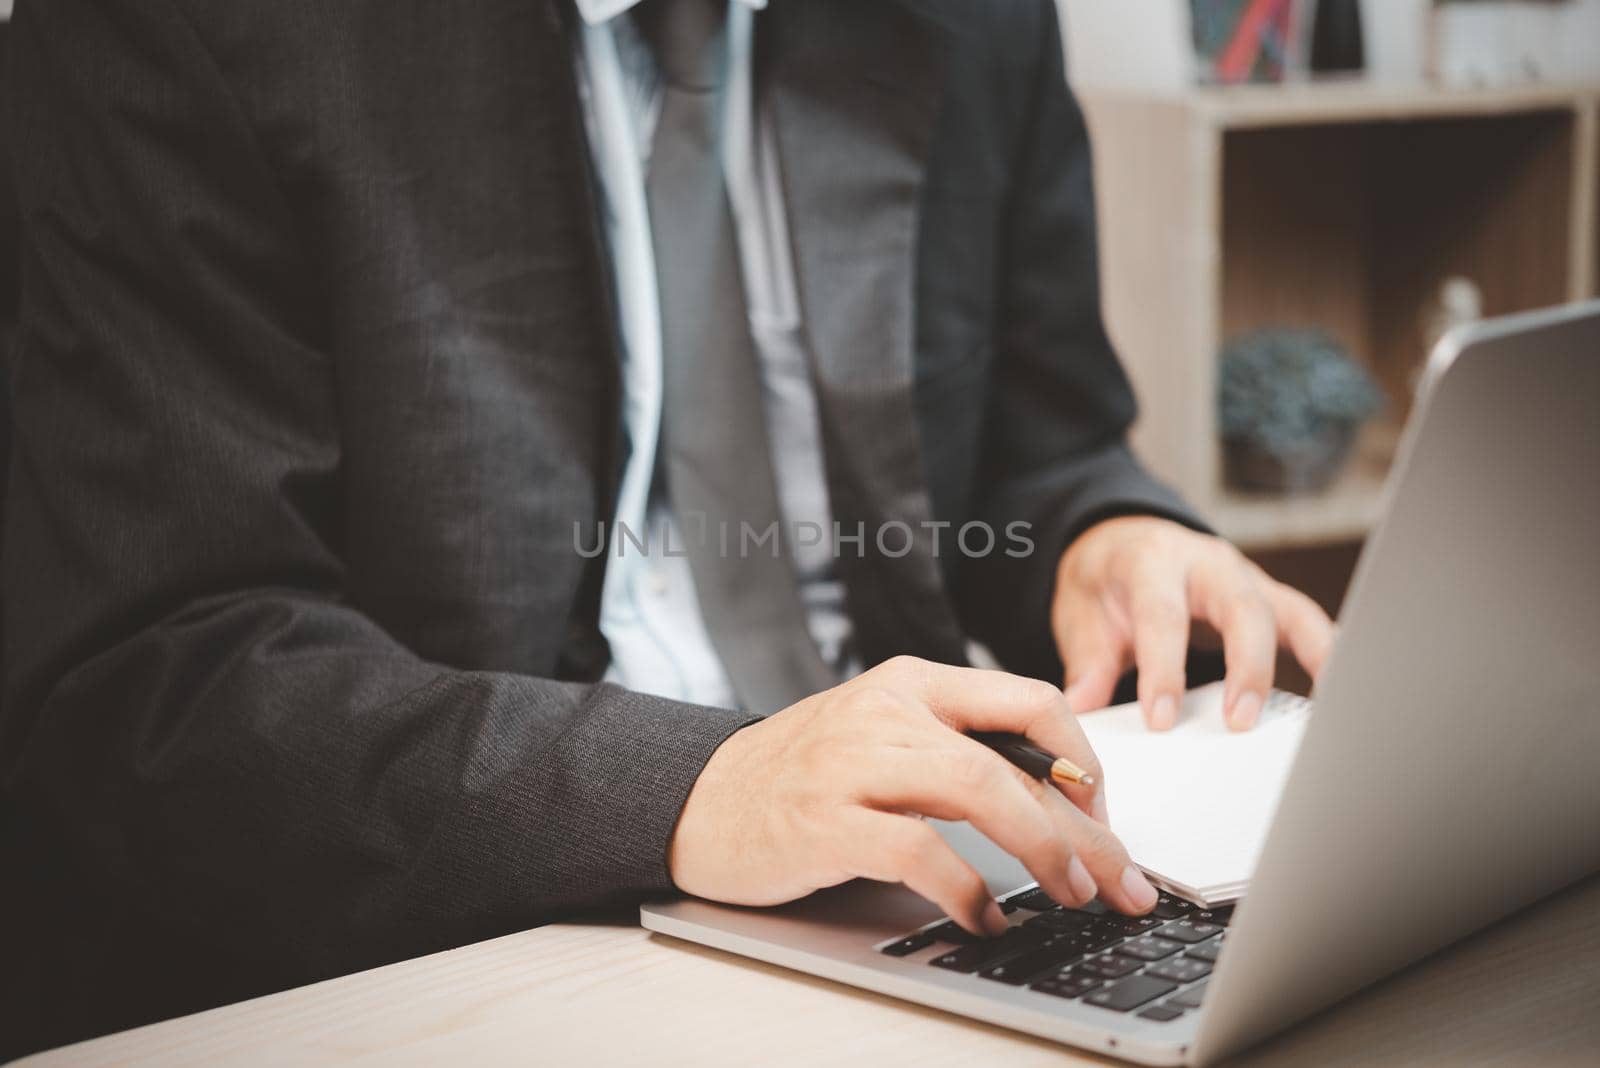 Man person using keyboard computer laptop holding pen and book on desk.